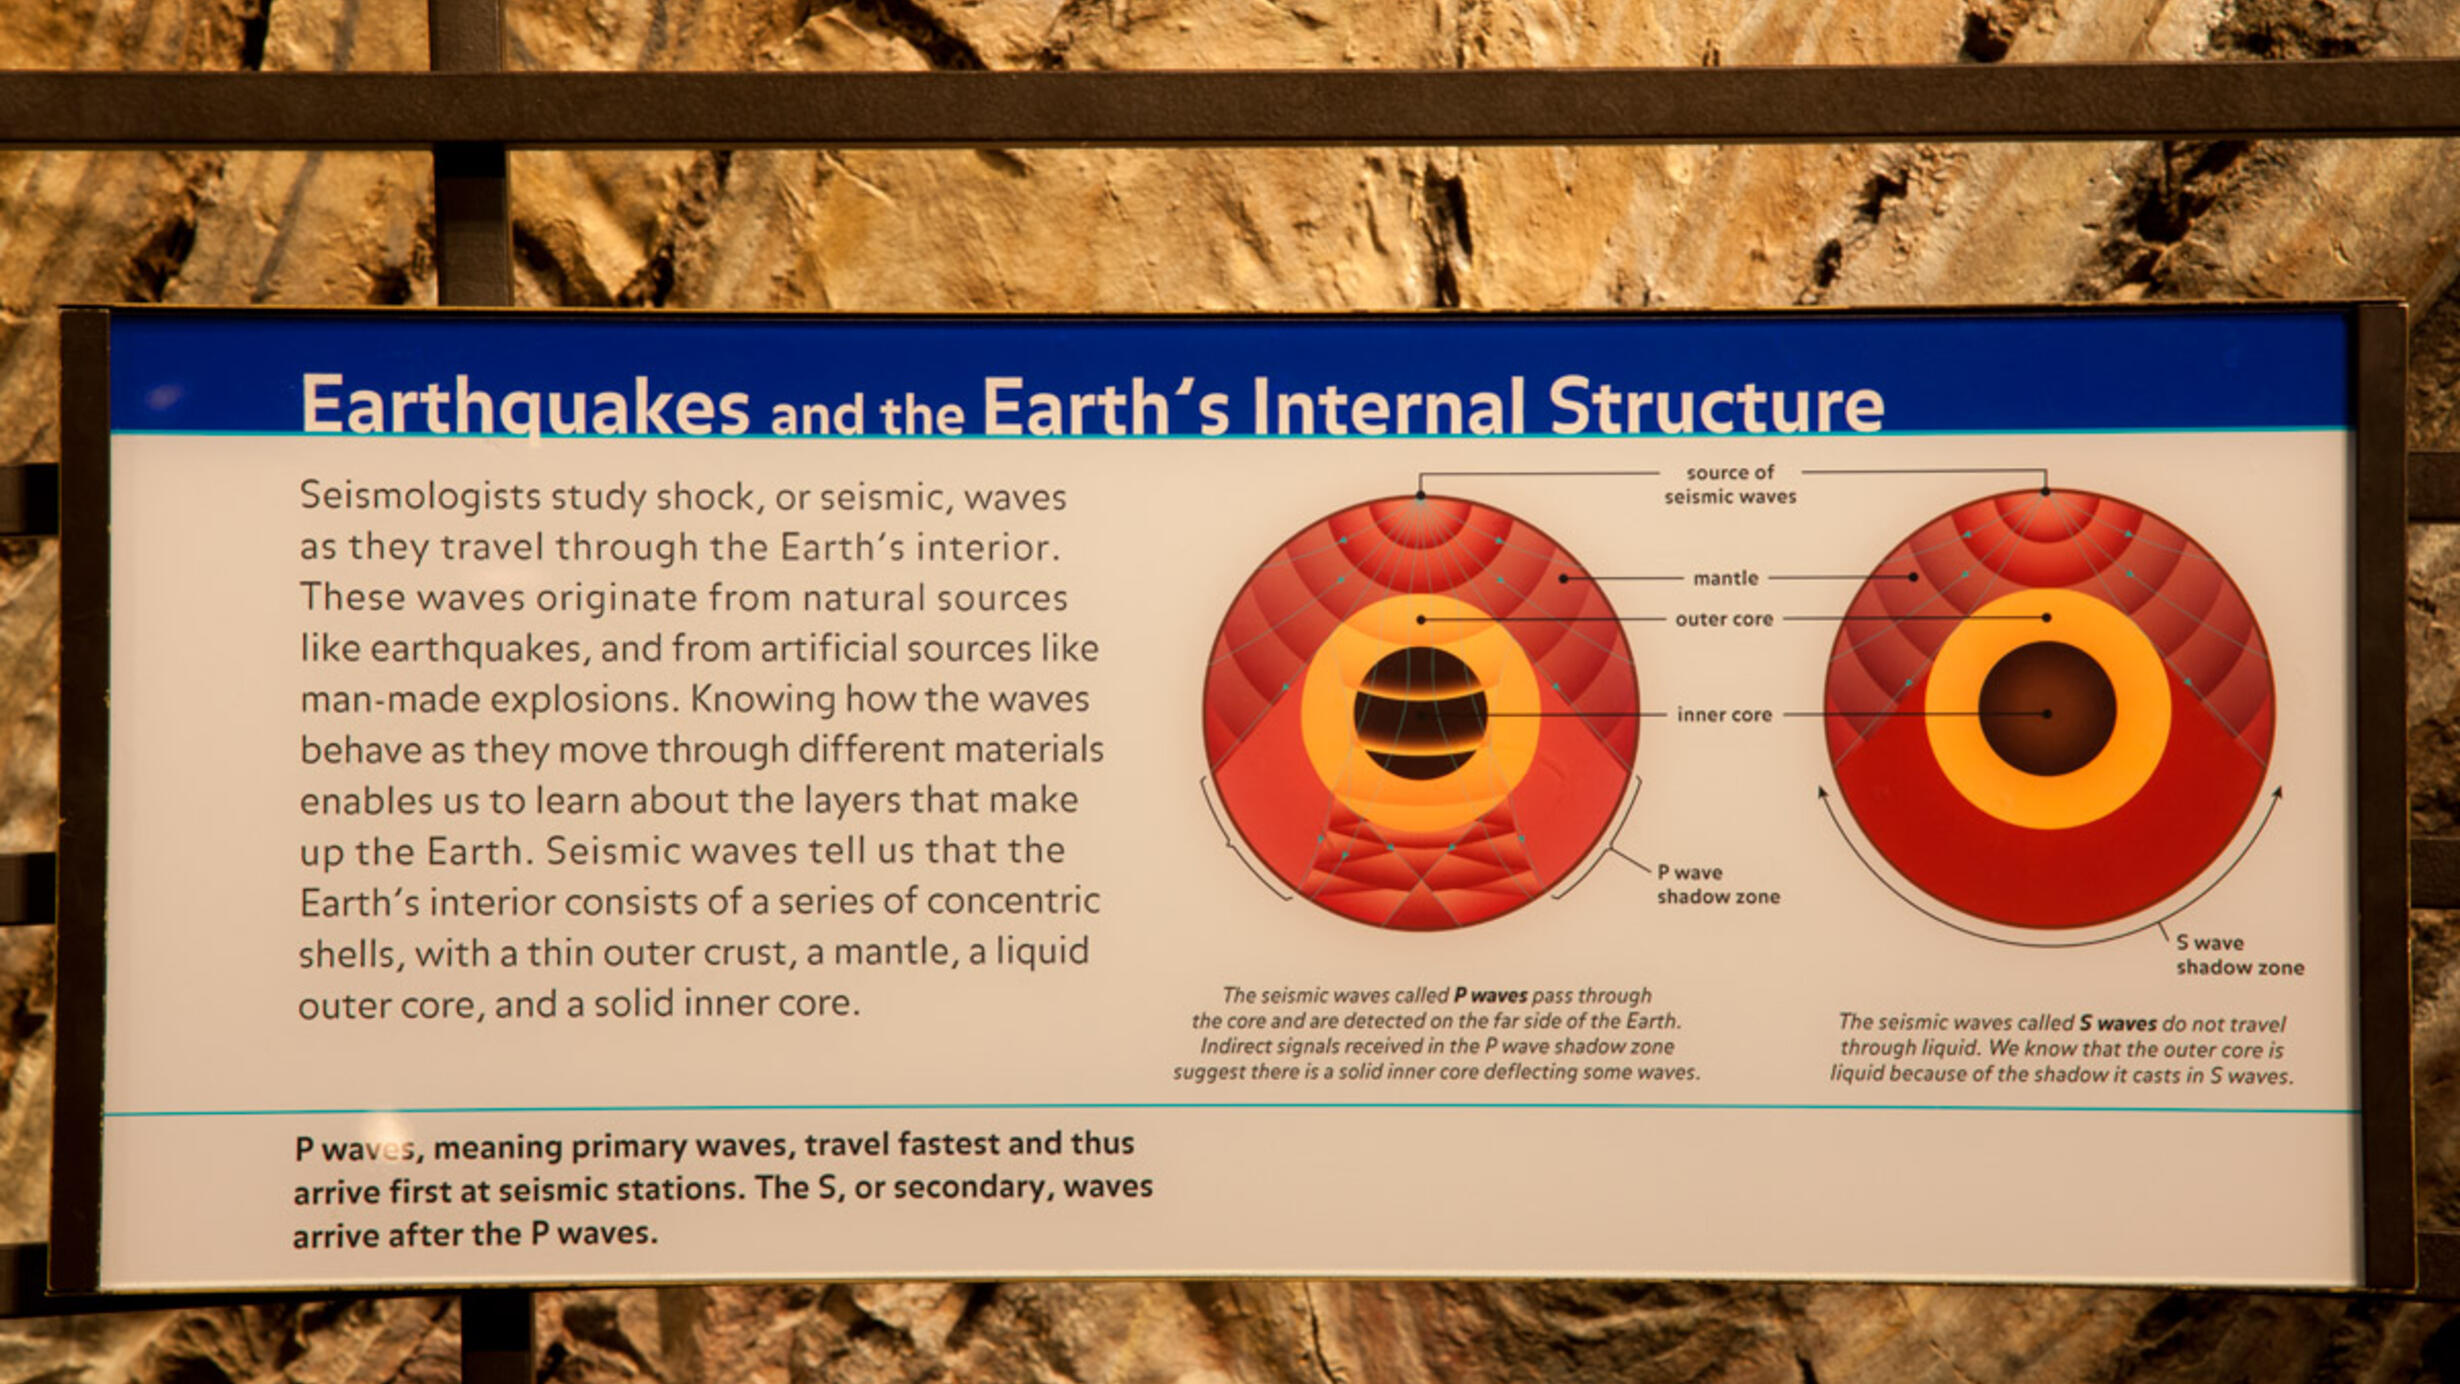 Earthquakes and the Earth's Internal Structure